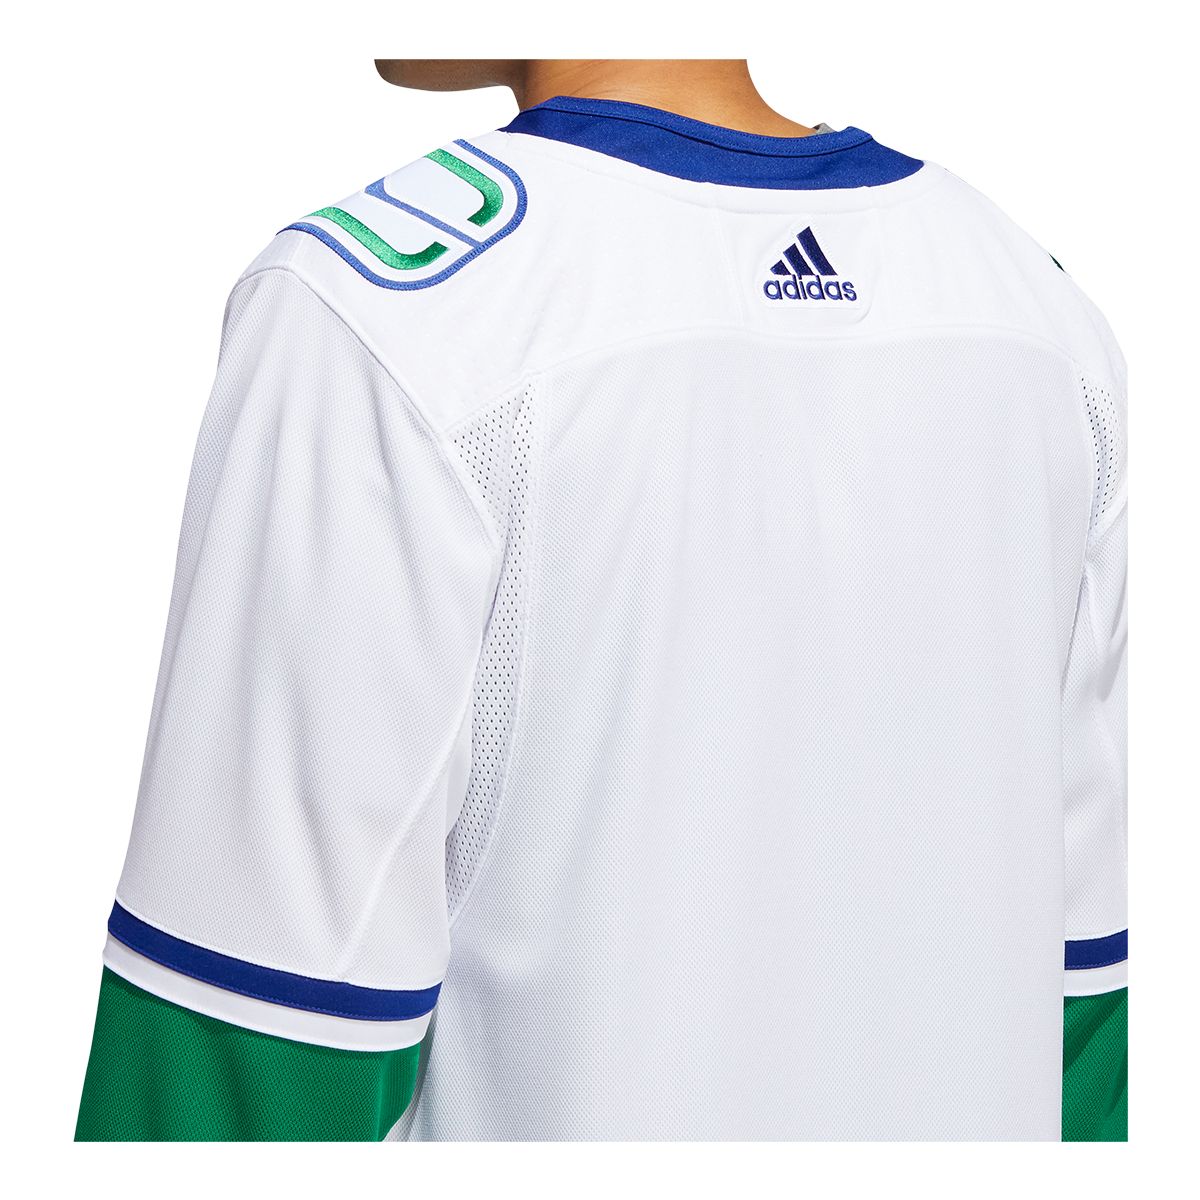 Vancouver Canucks adidas Prime Authentic Jersey, Hockey, NHL